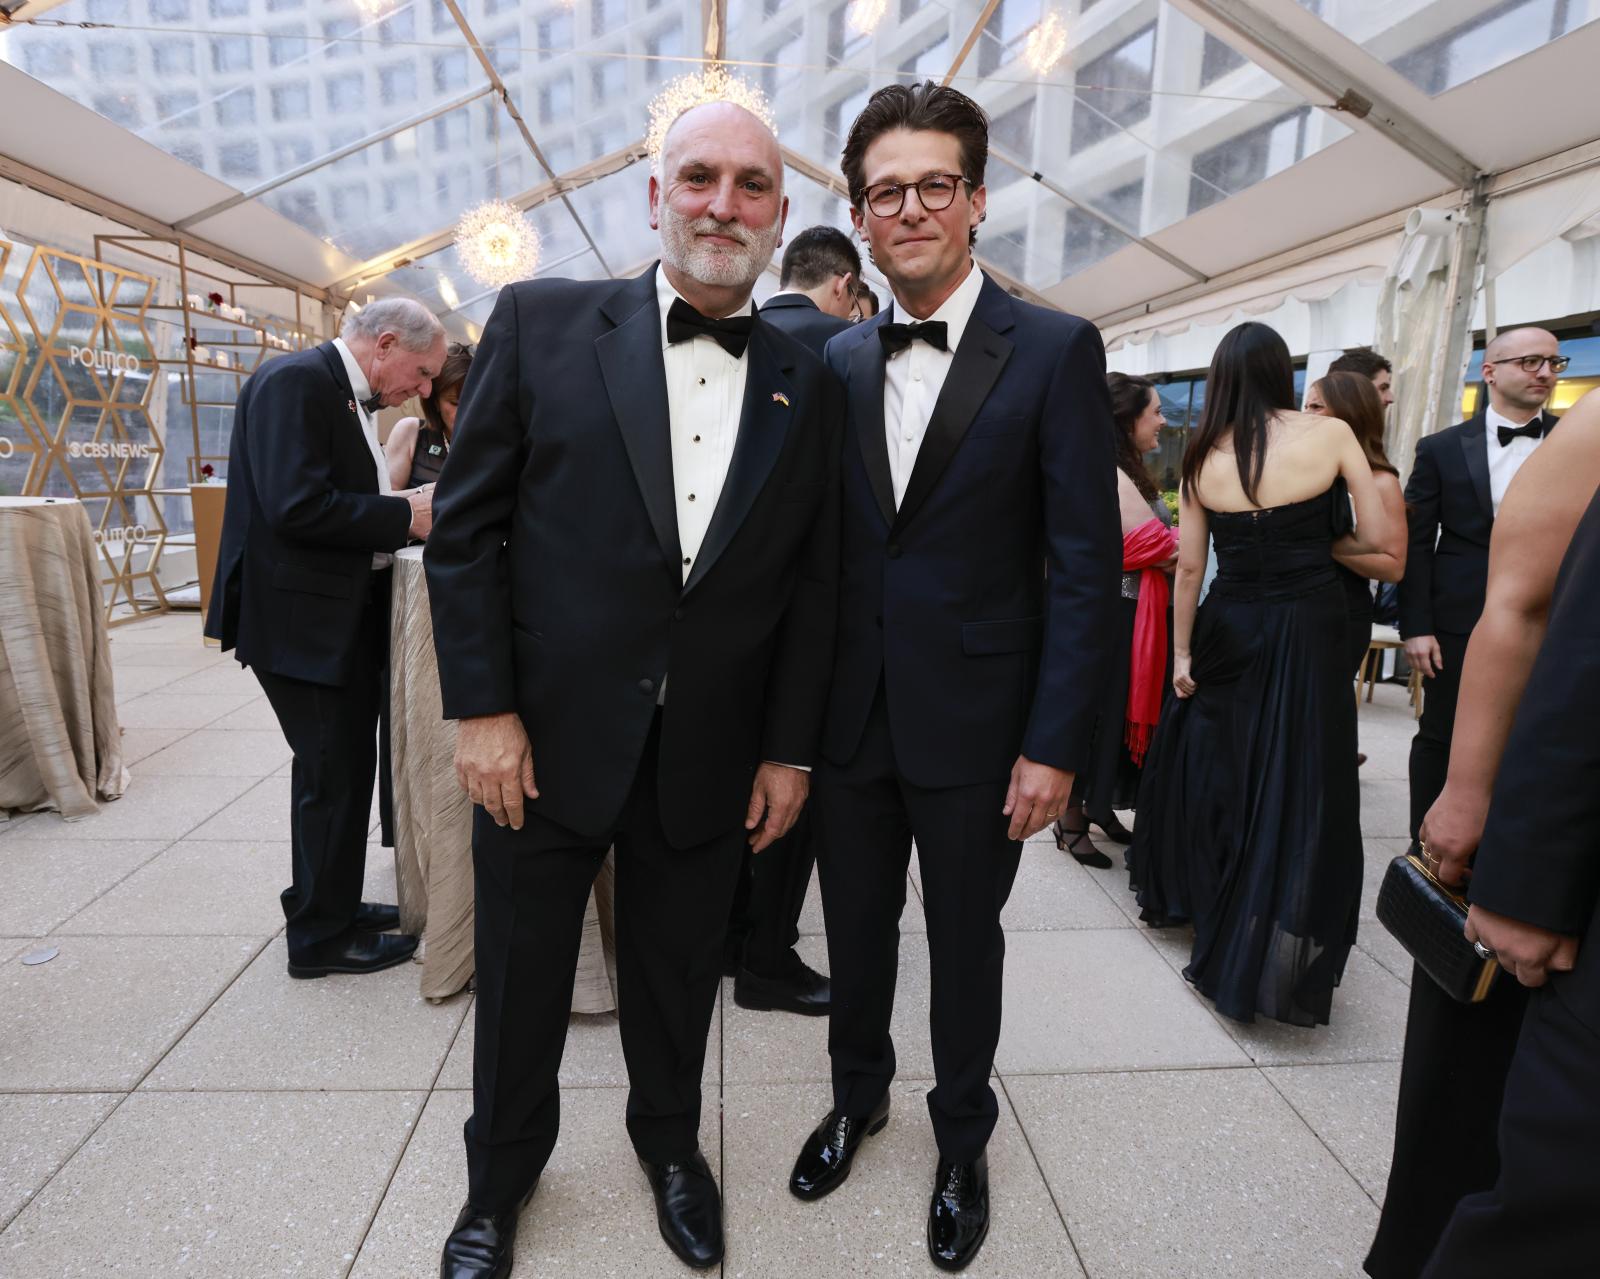 Image from Events - Jose Andres and Jacob Soboroff at the CBS News/POLITICO...